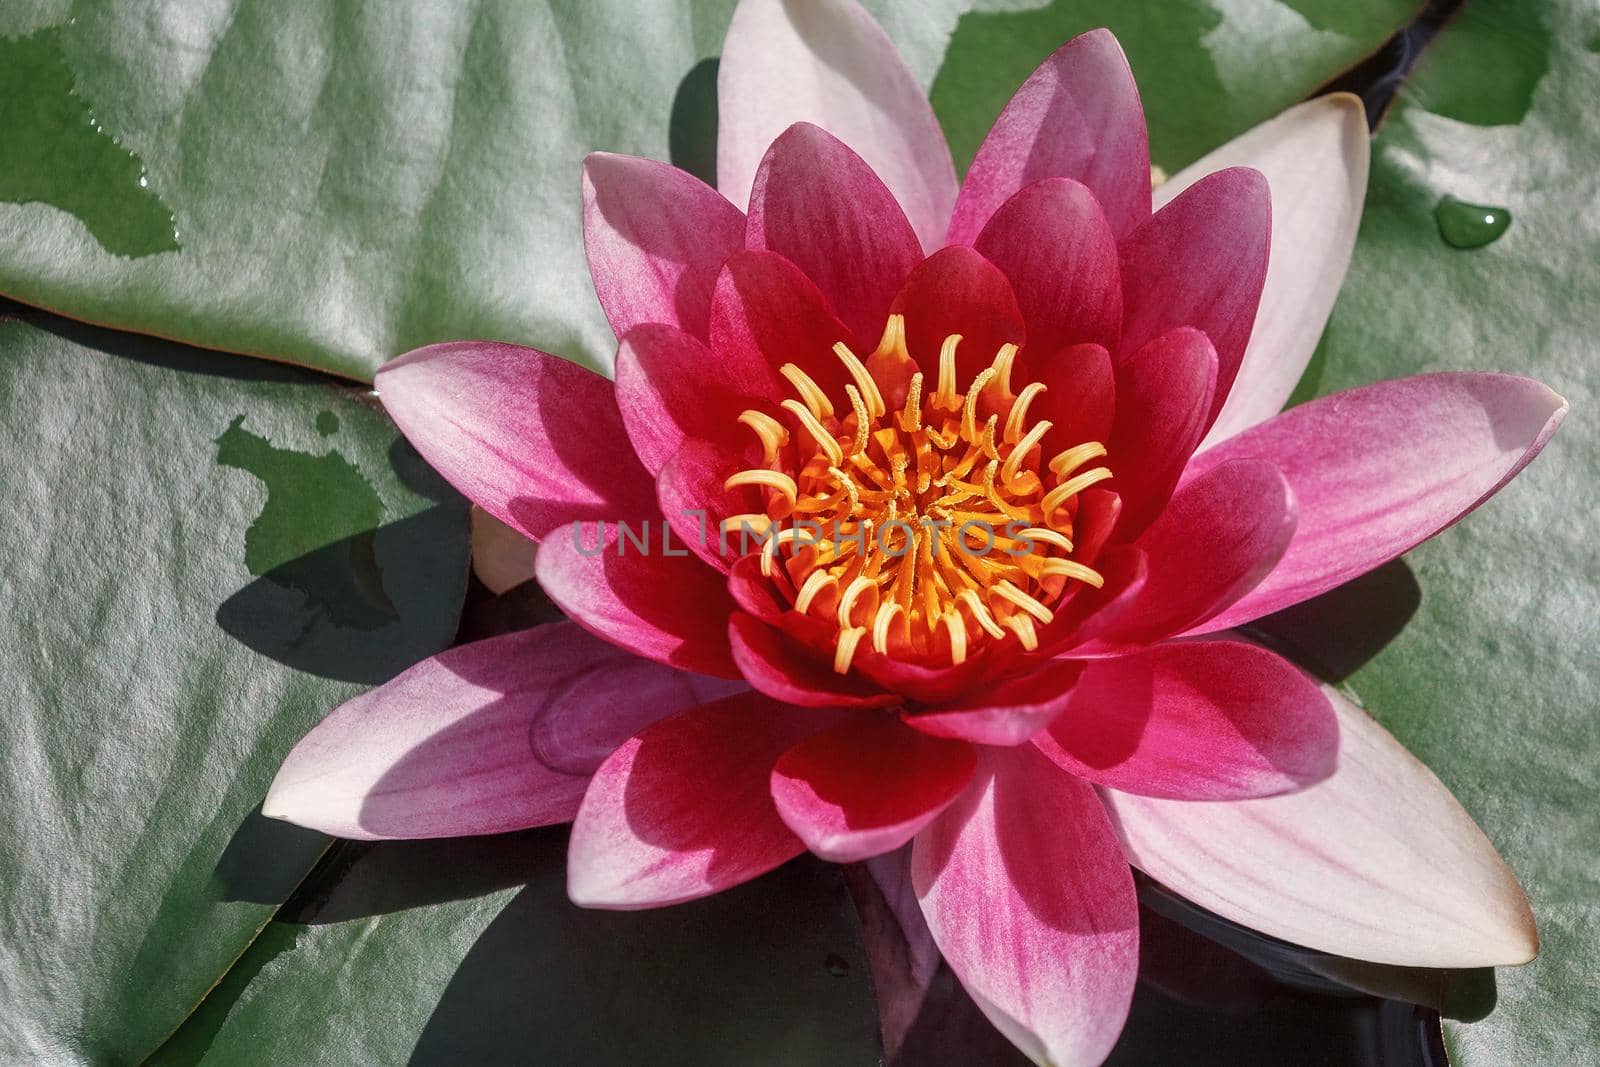 Beautiful blooming red water lily lotus flower with green leaves in the pond. by Lincikas